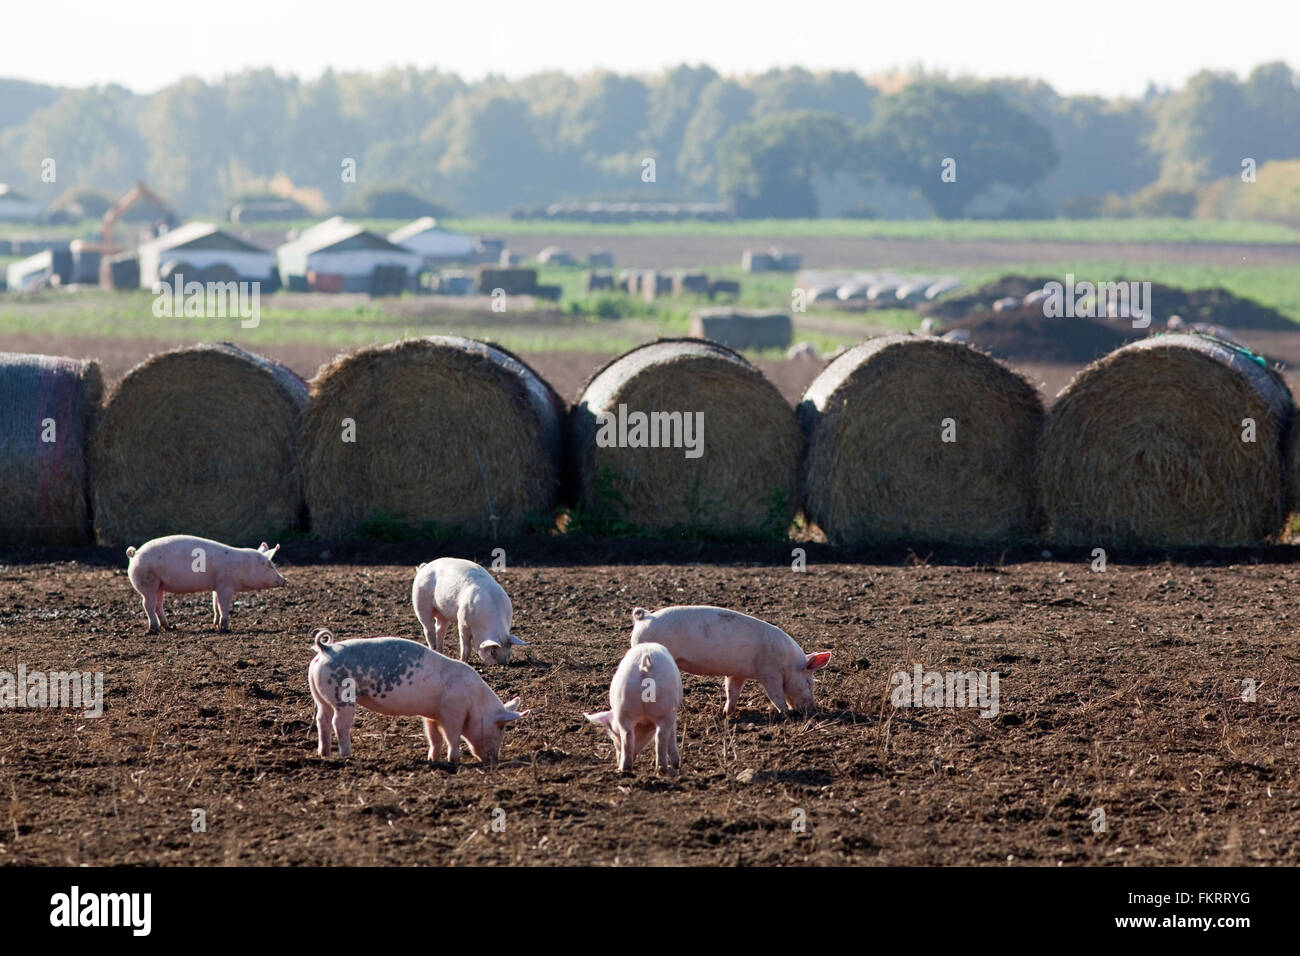 Pig Farm. Domestic animals (Sus scrofa). Outdoor, free range enclosure. Pigs contained by straw bales. Norfolk. Stock Photo